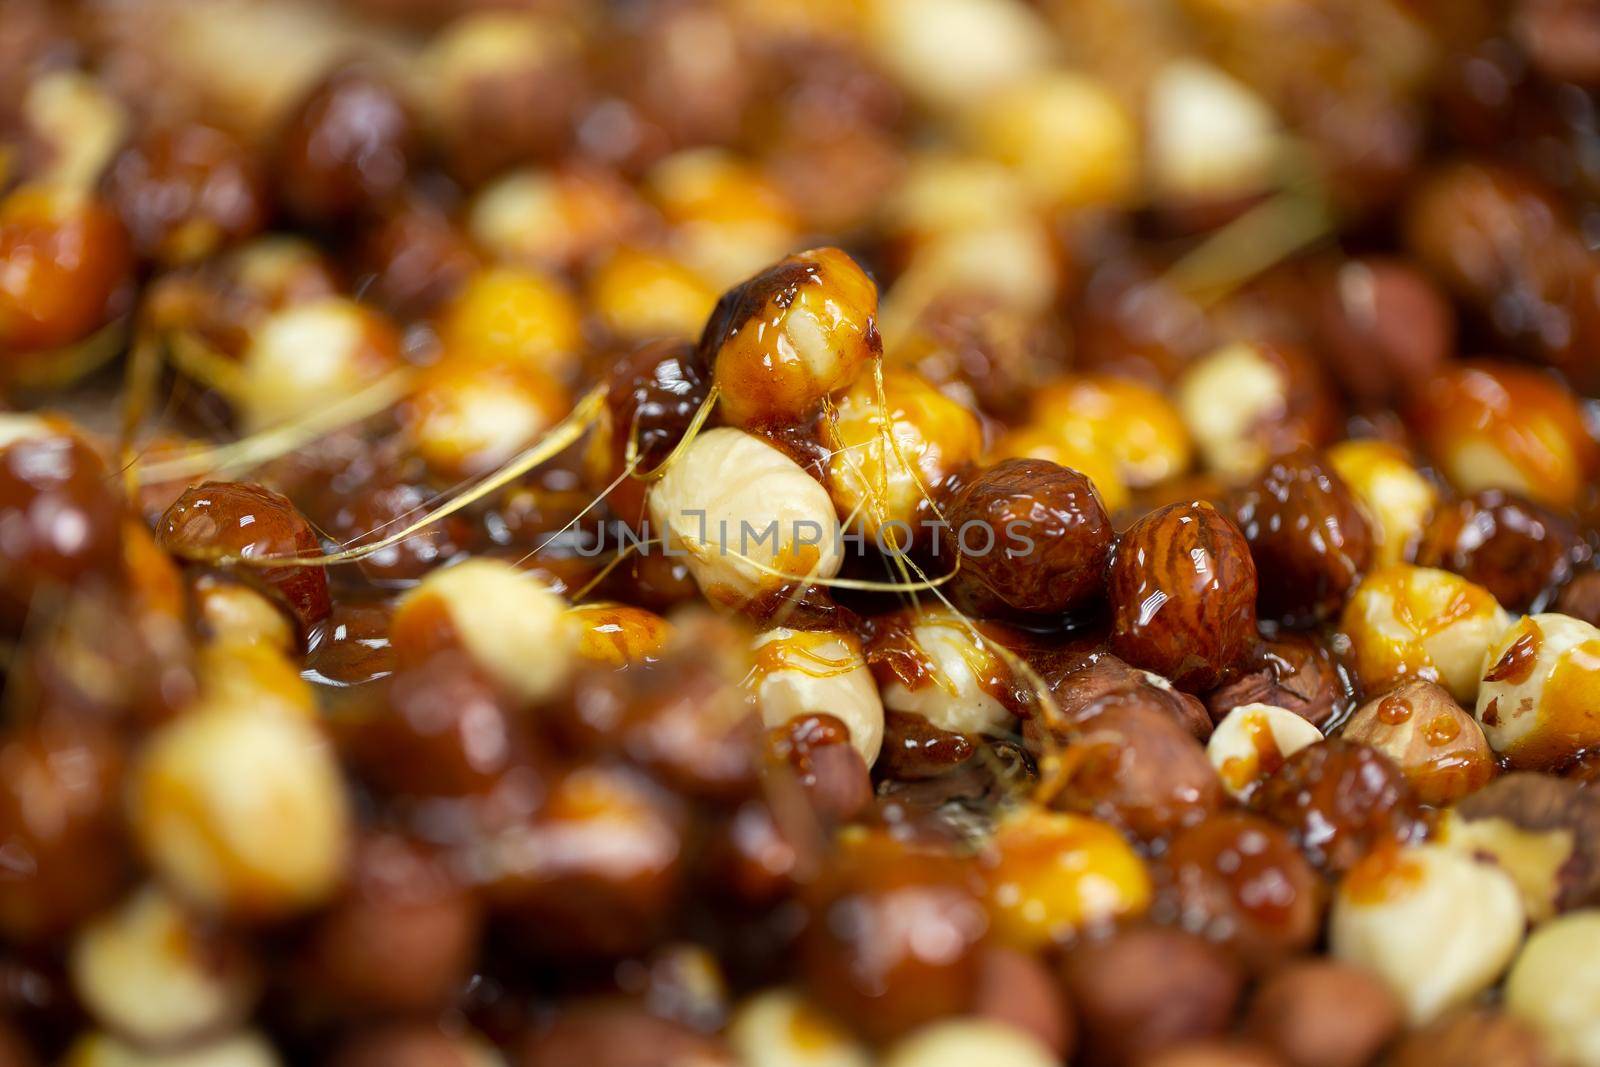 Delicious sweet hazelnut nuts in sugar caramel. Preparation of desserts in a pastry shop from natural ingredients.